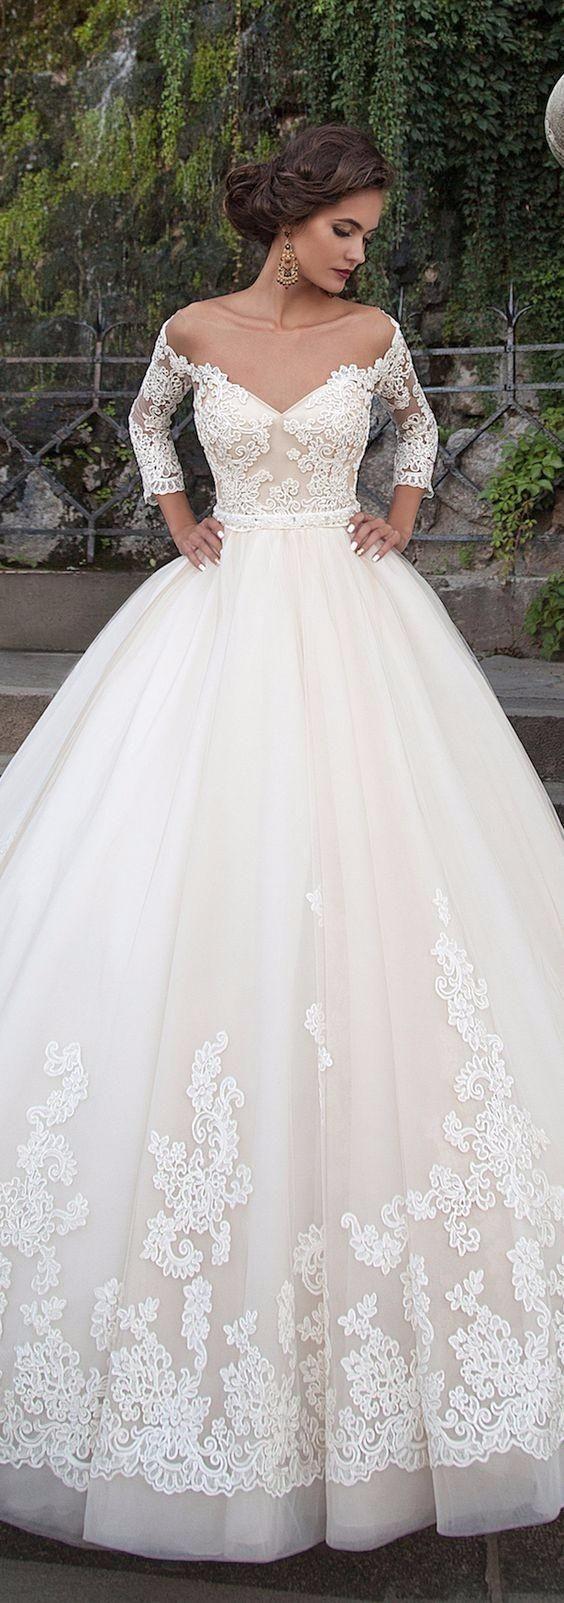 Wedding - 30 Of The Most Graceful & Gorgeous Lace Sleeve Wedding Dresses